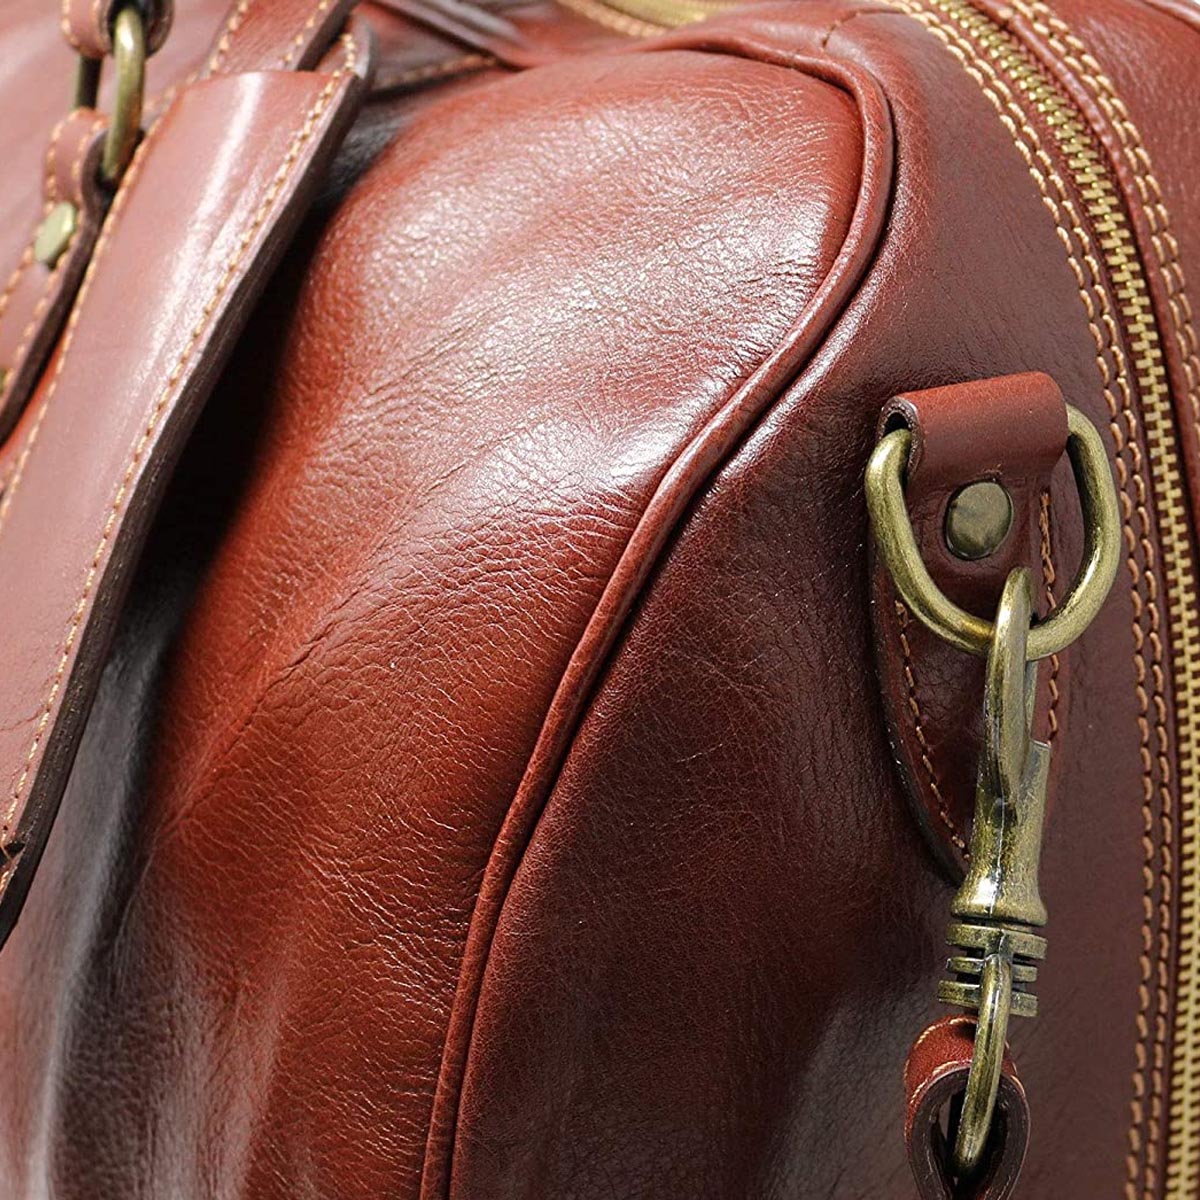 Classic Brown Leather Duffle Bag for Weekend (6)